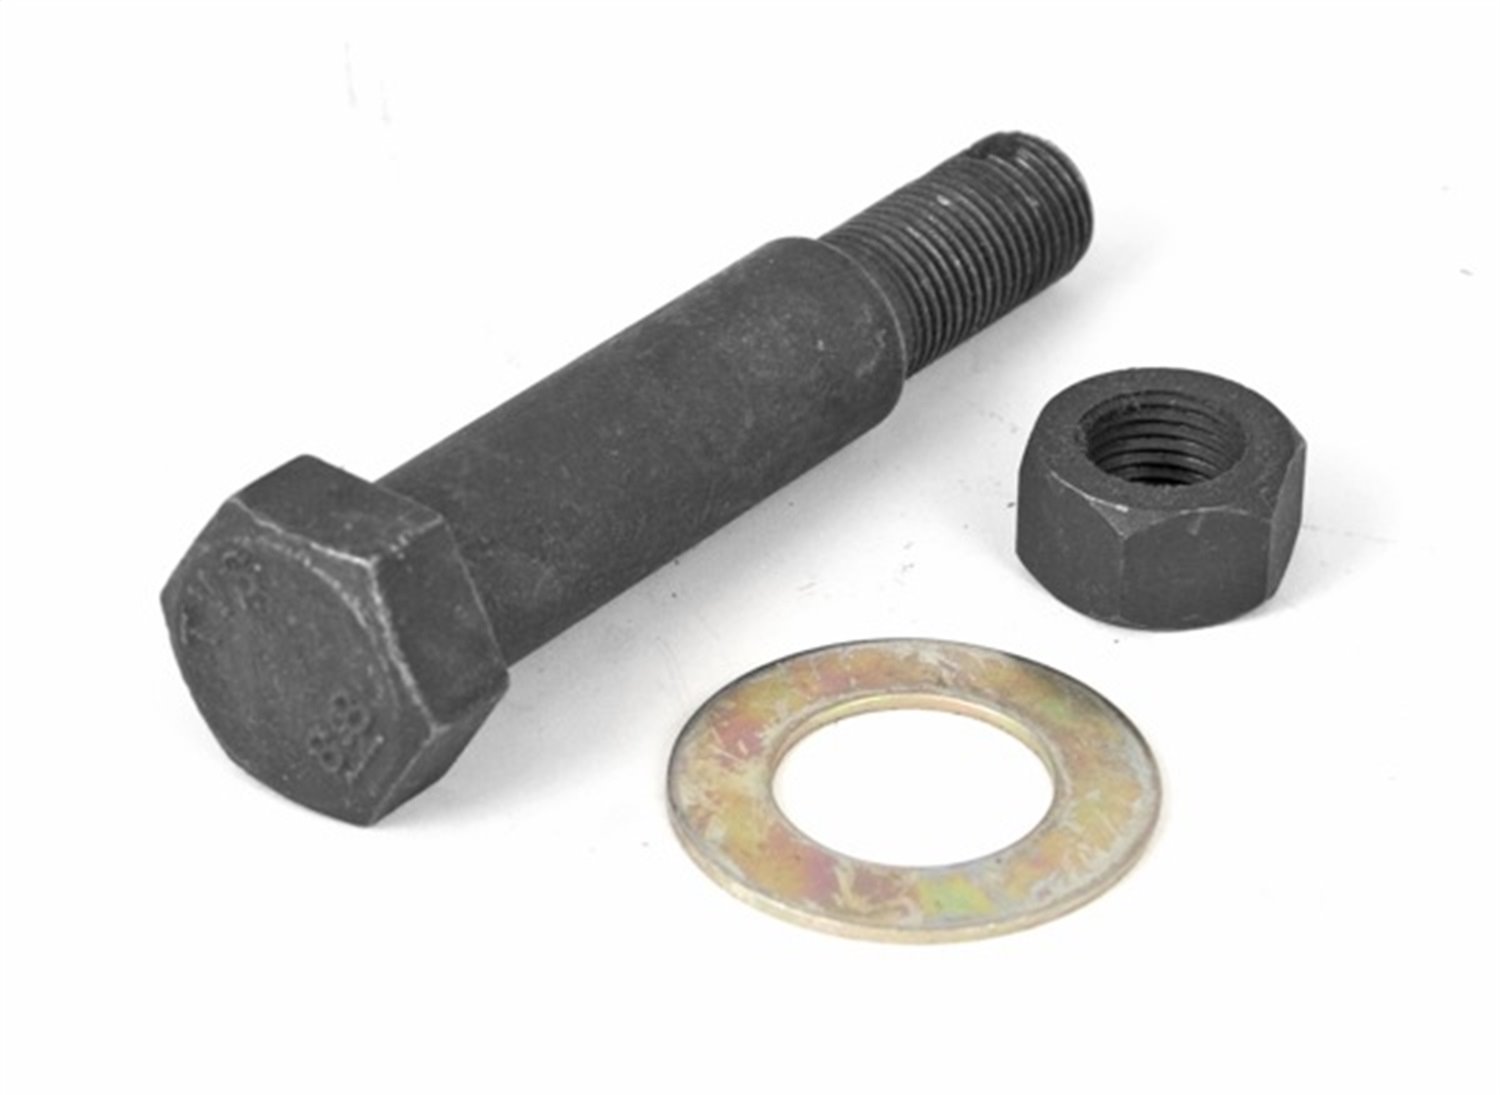 This transfer case mounting stud from Omix-ADA for Dana 18 transfer cases found in 46-71 Willys and Jeep models.